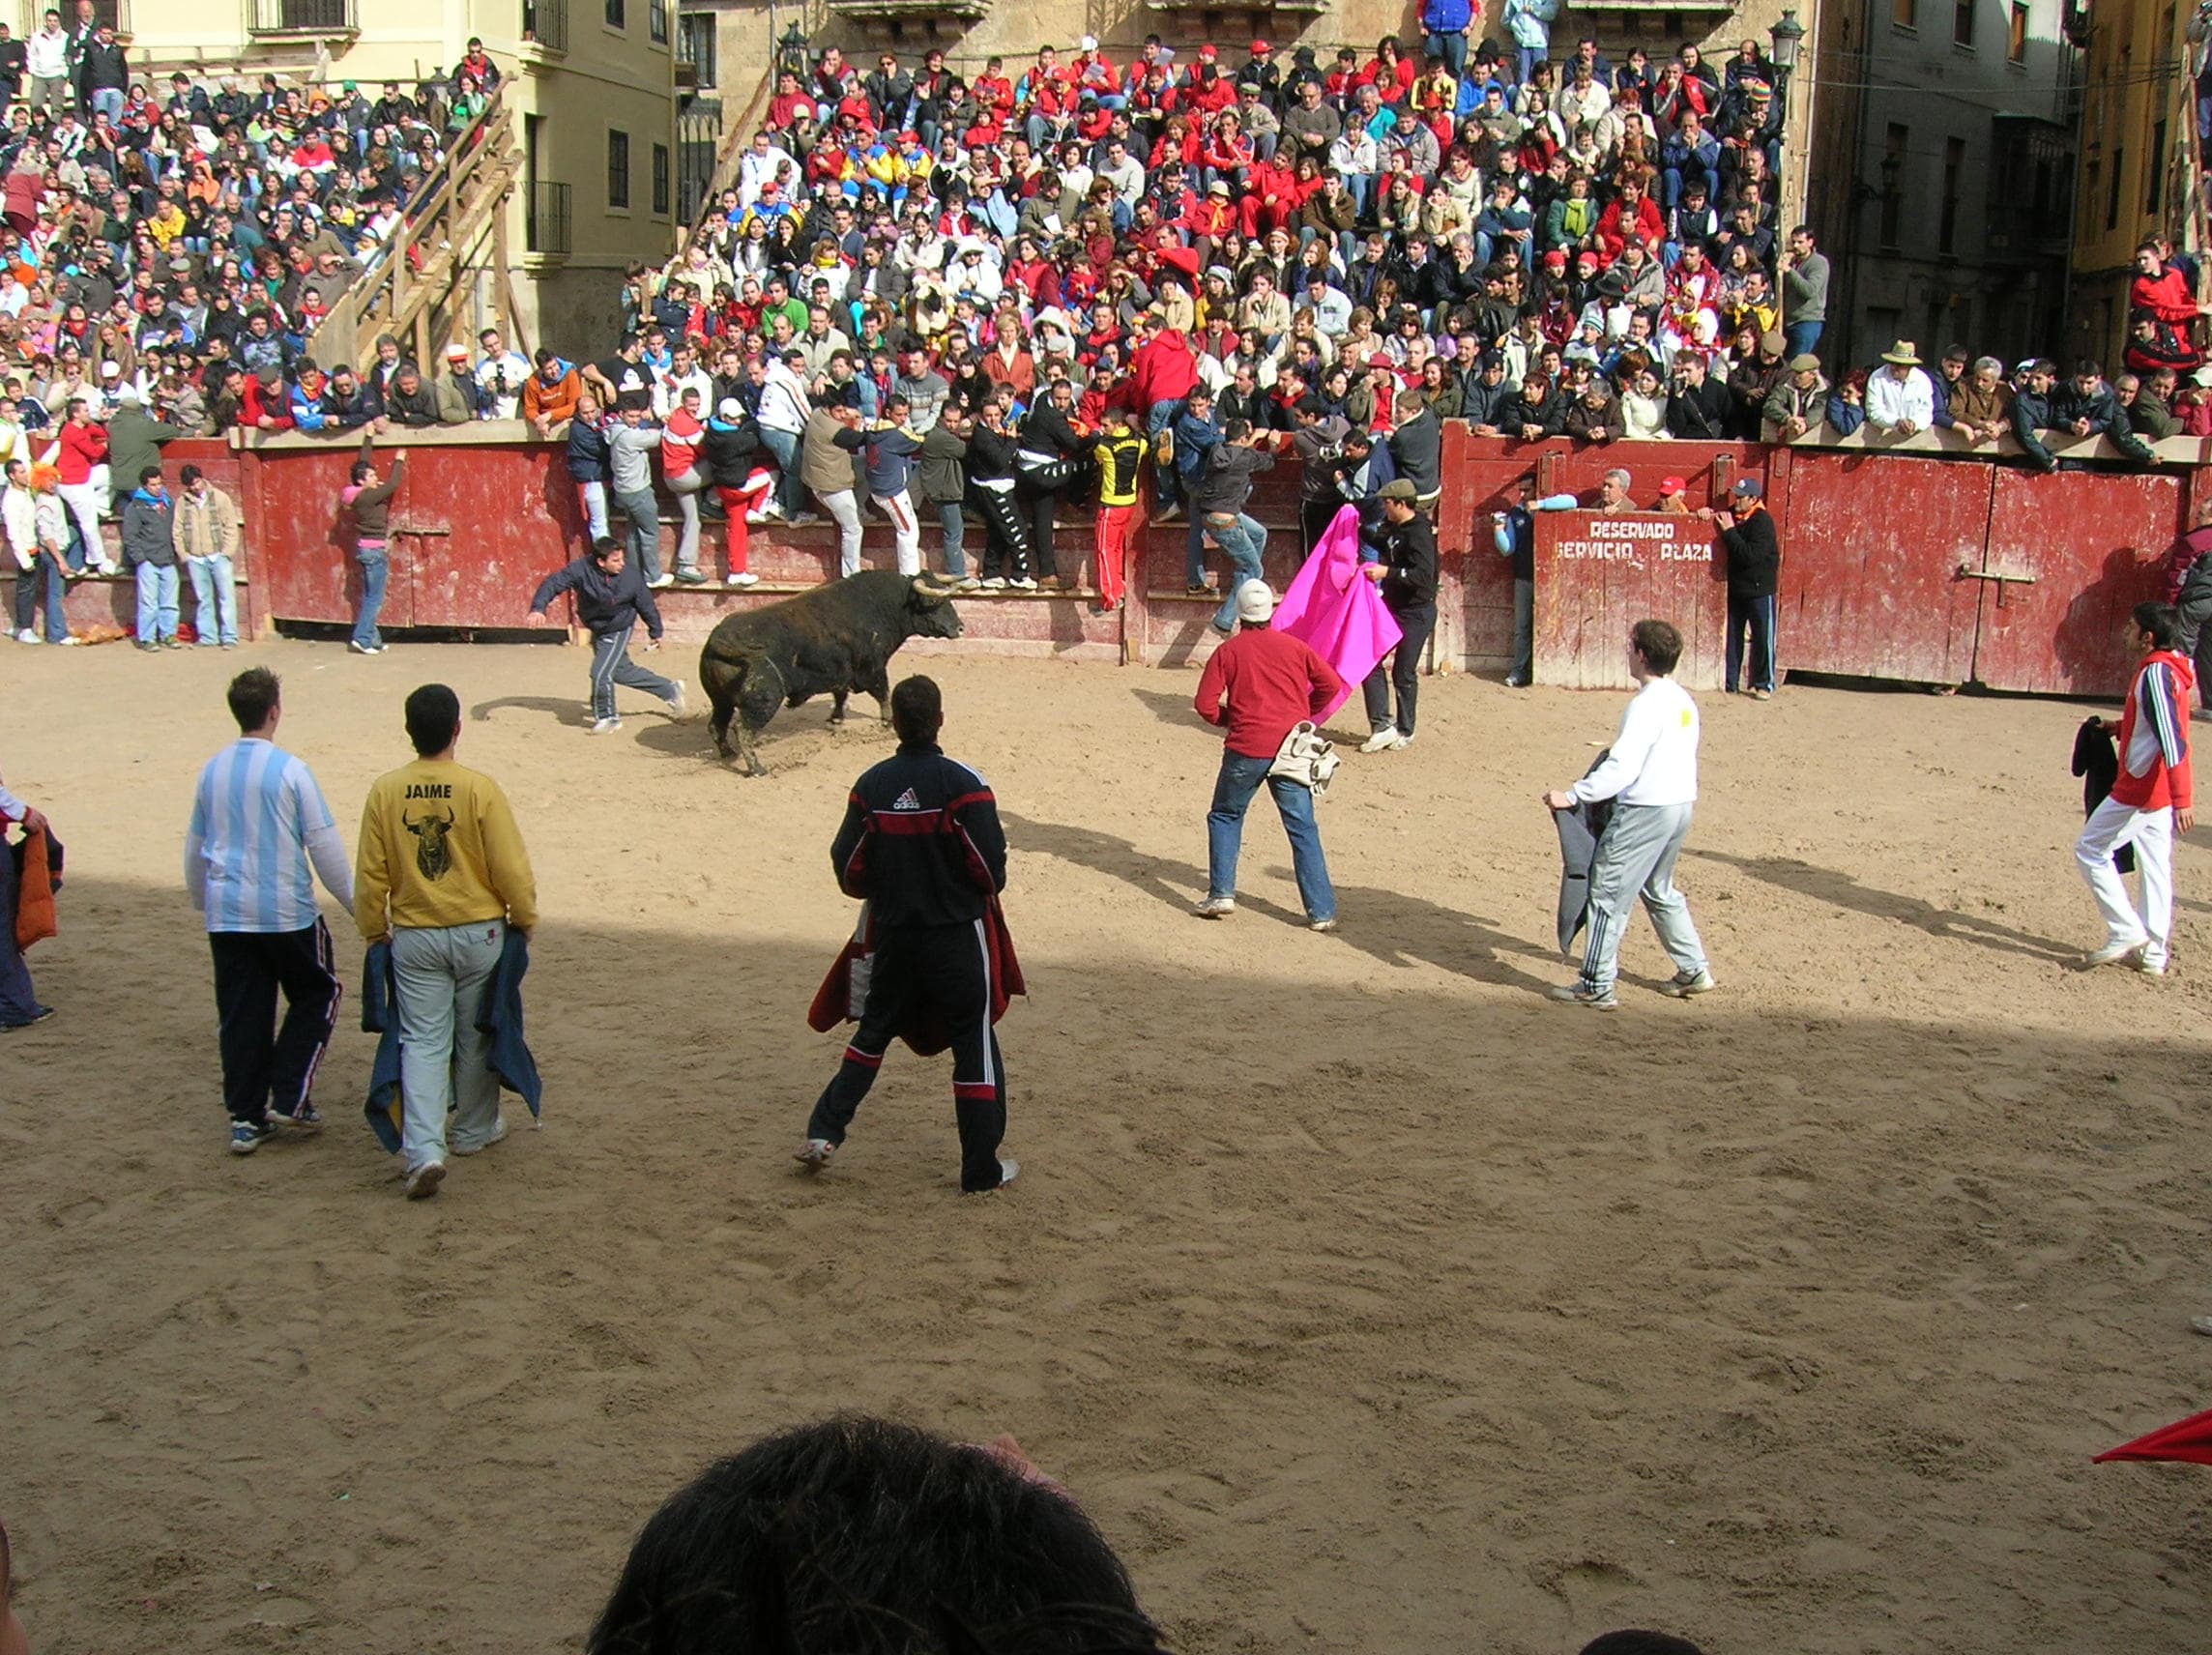 The beginning of a bullfight in Spain